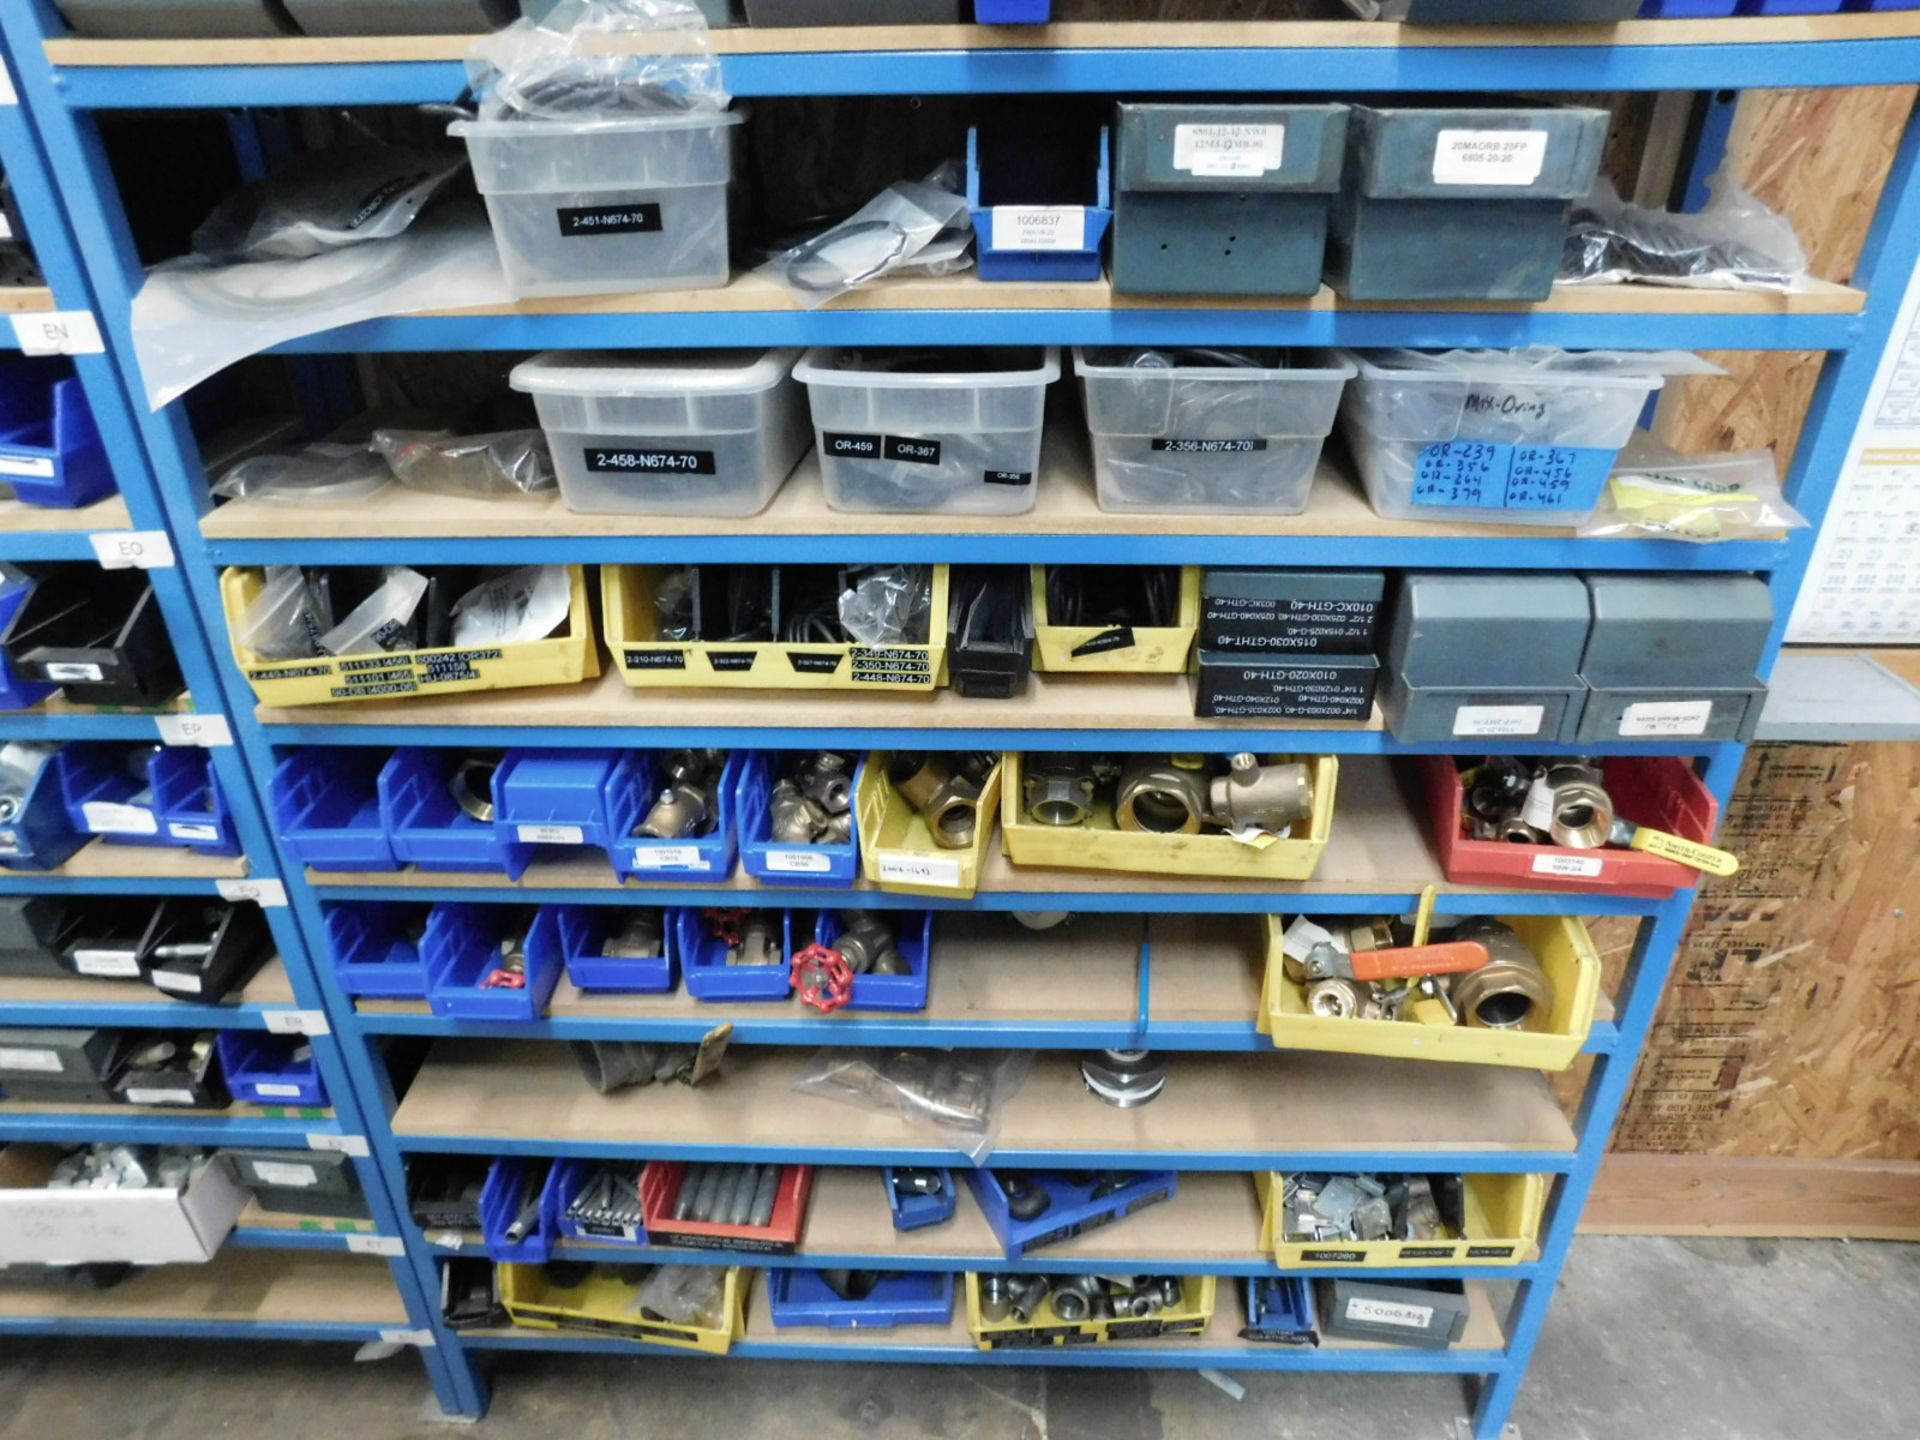 LOT - (4) SECTIONS OF SHELVING, W/ CONTENTS TO INCLUDE: PLUMBING VALVES, FITTINGS, HYDRAULIC & - Image 10 of 10